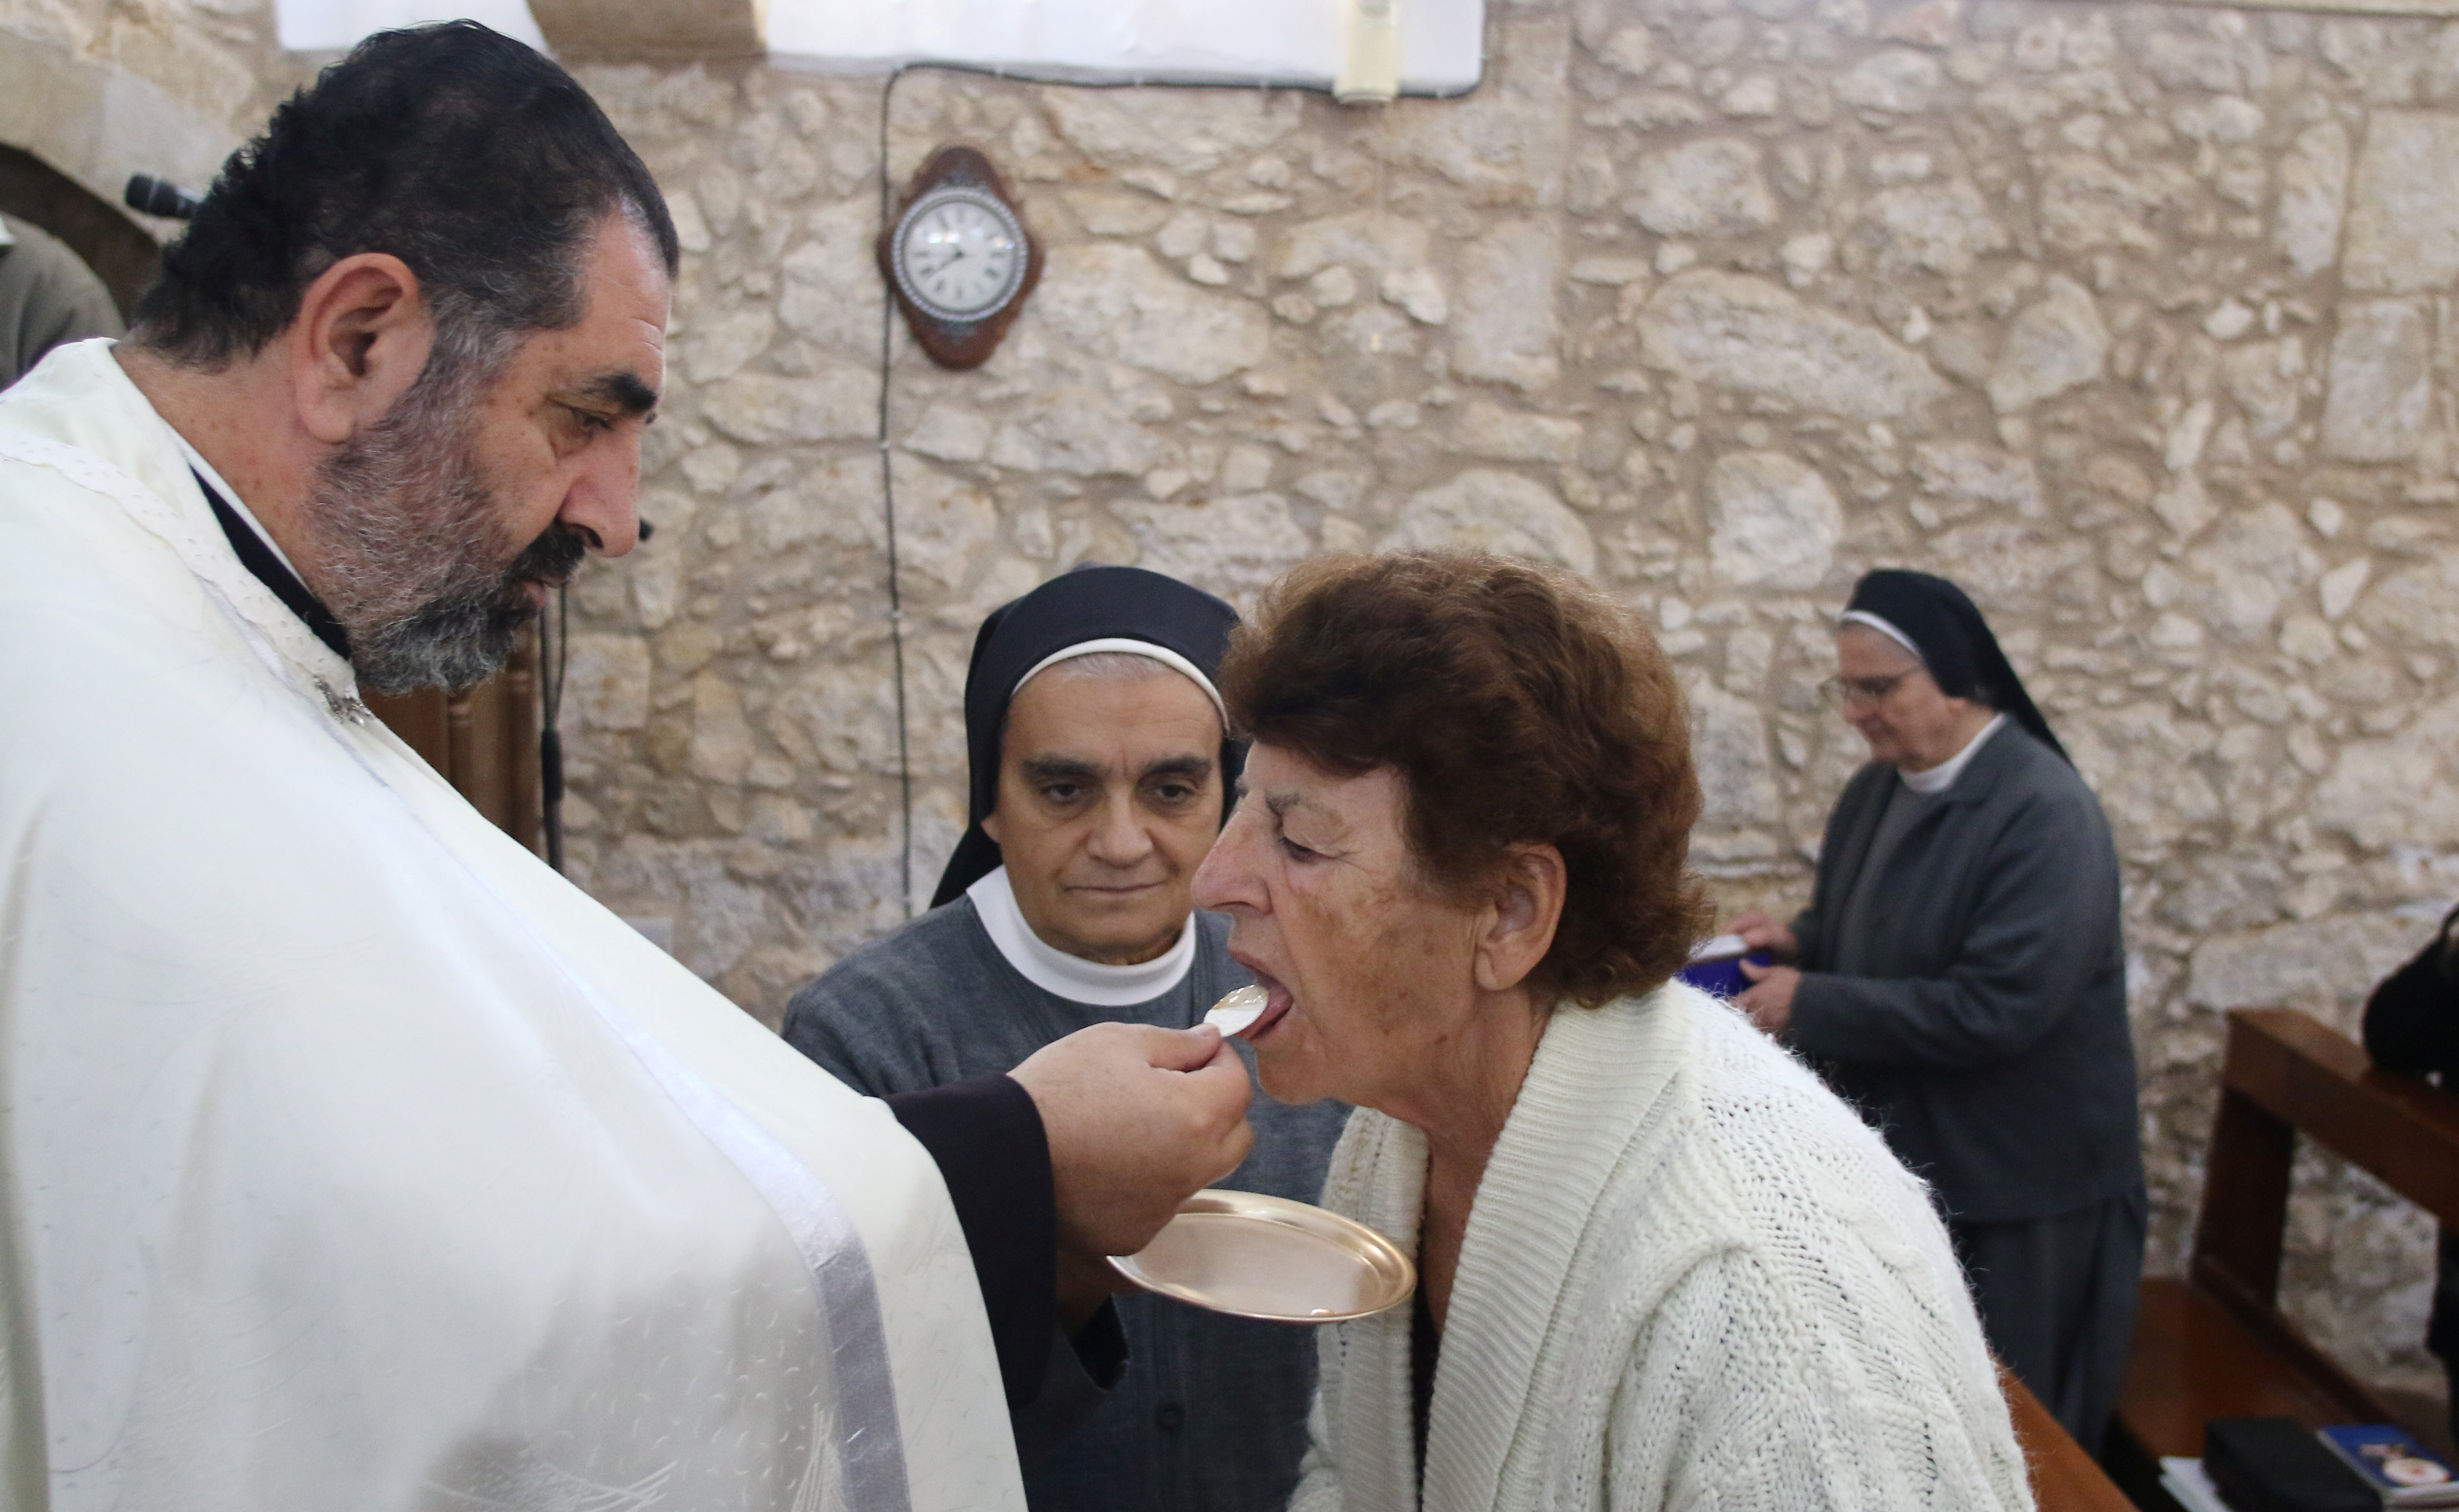 Father Iosif Skender, a Maronite priest, gives Holy Communion to a member of the congregation at the Church of St. George in Kormakitis, Cyprus November 22, 2021. REUTERS/Yiannis Kourtoglou